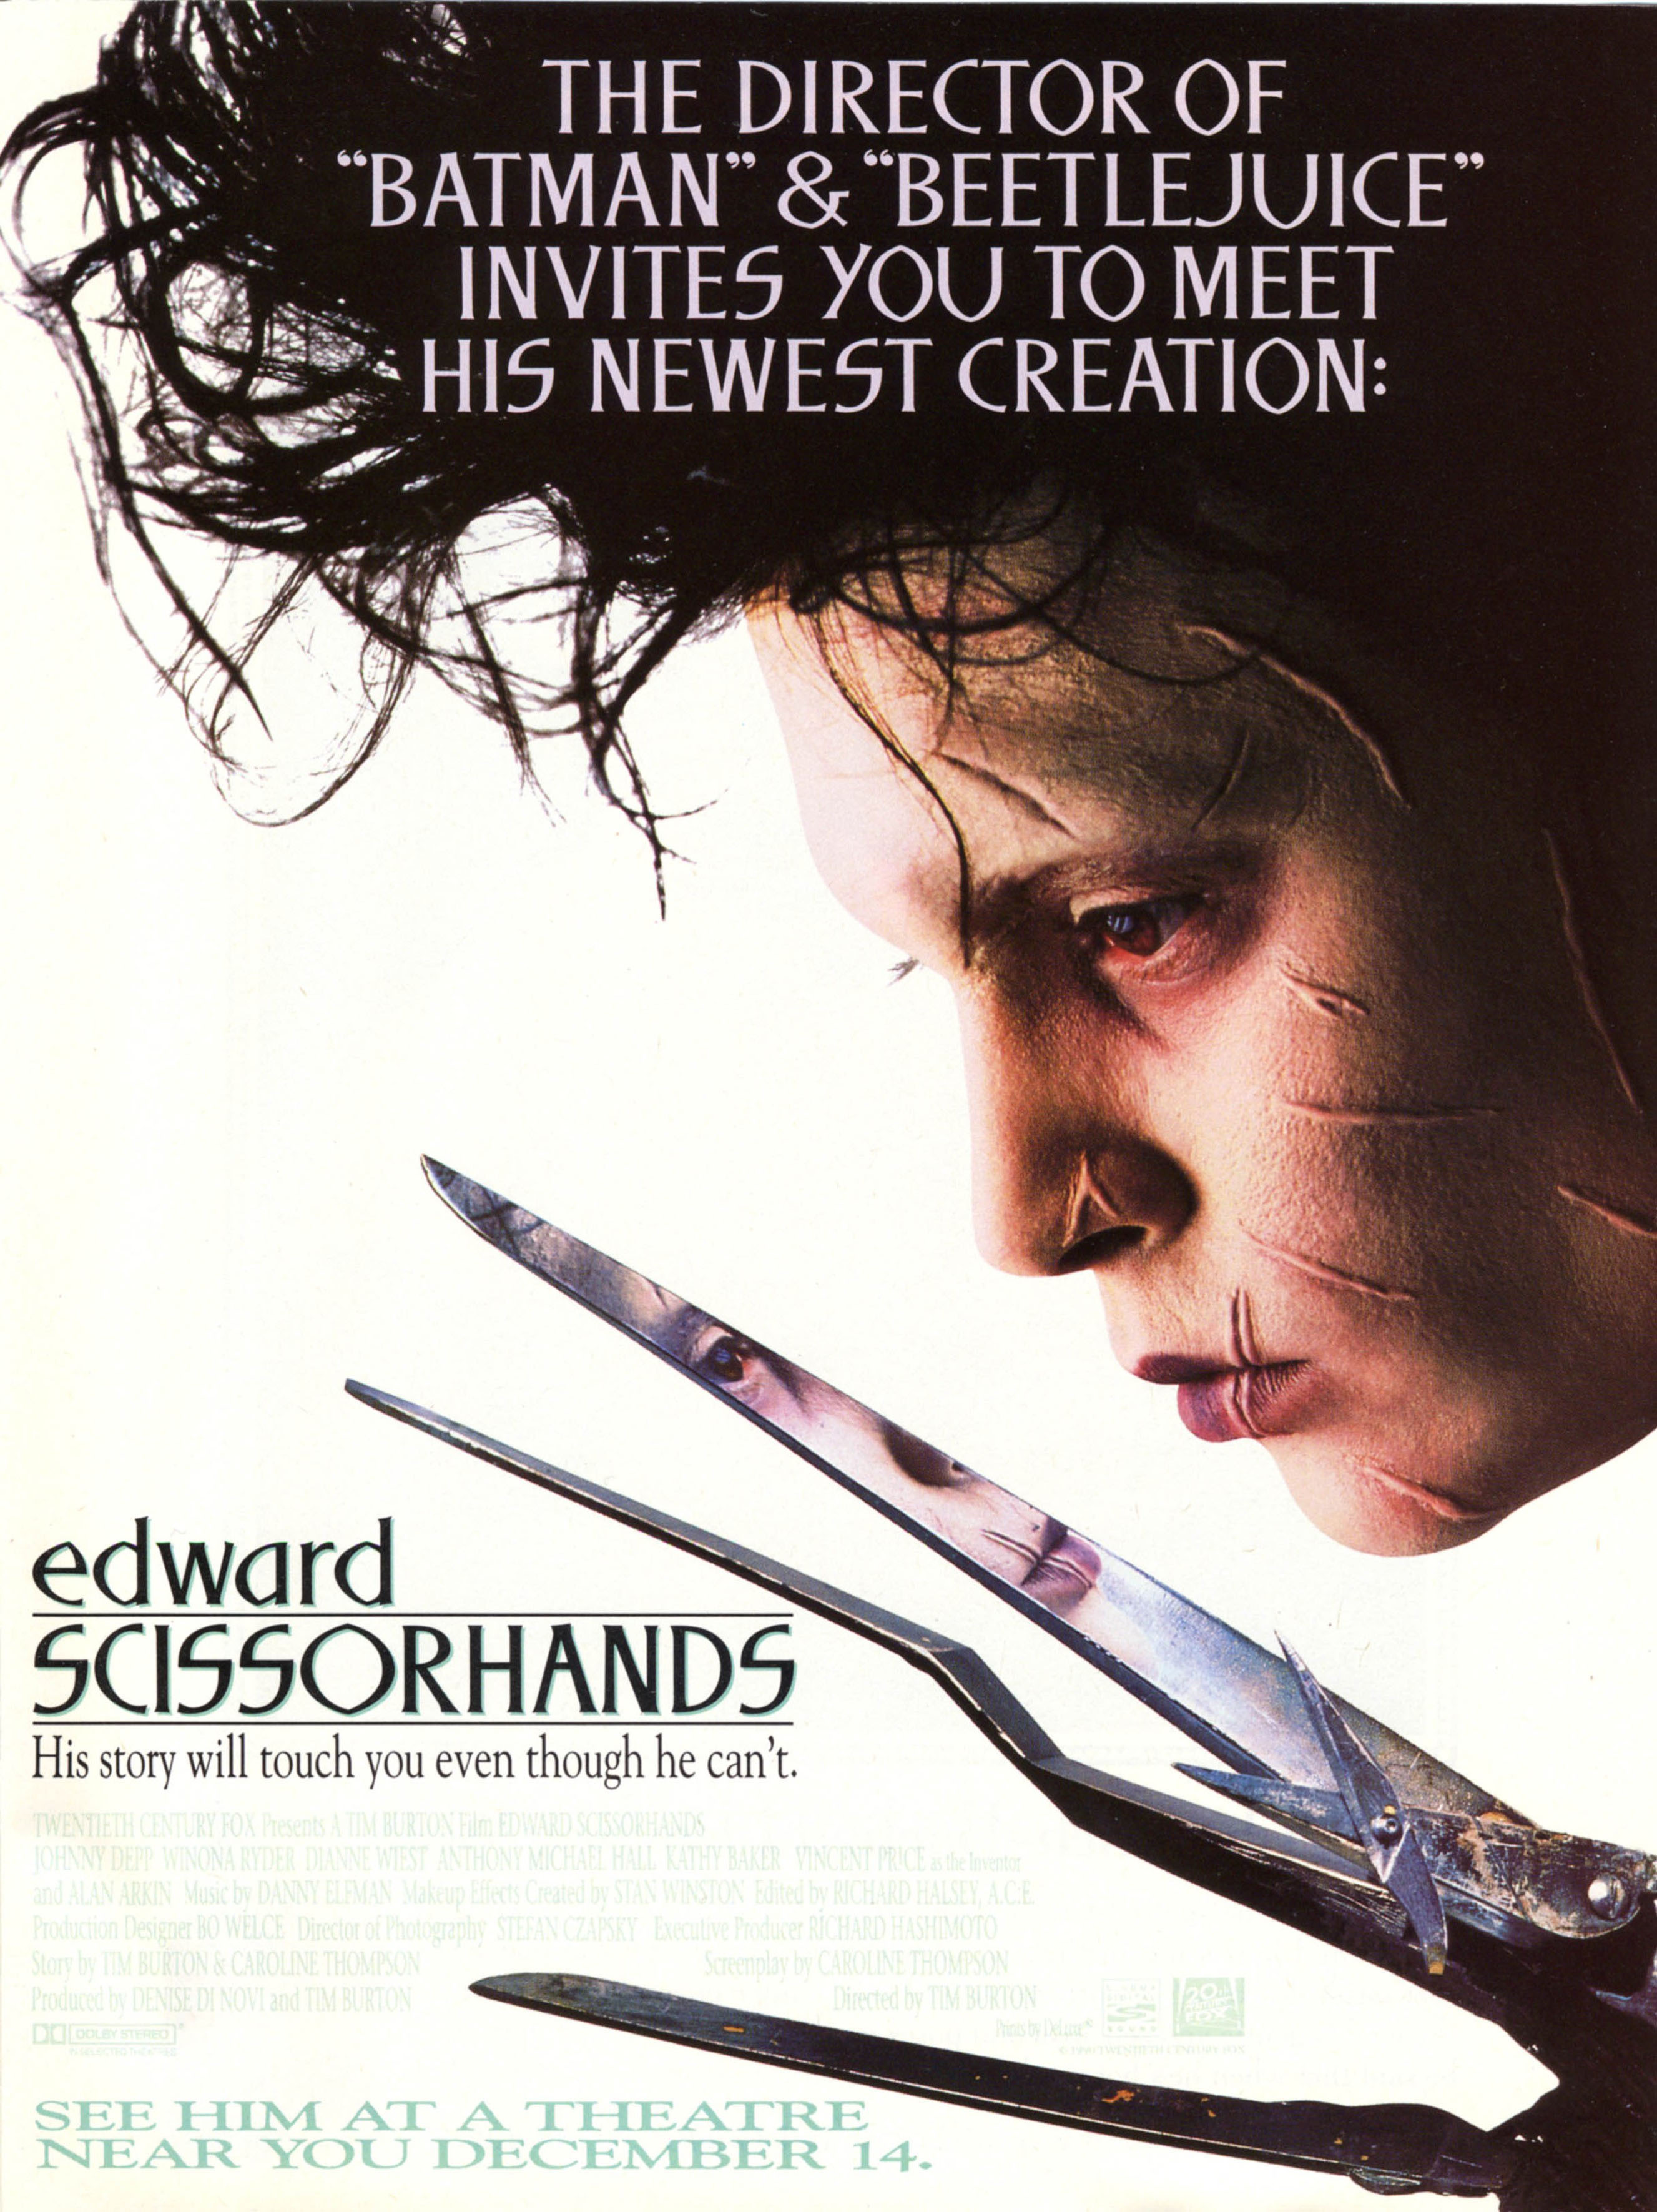 An Essay on Edward Scissorhands and Disability Stereotypes